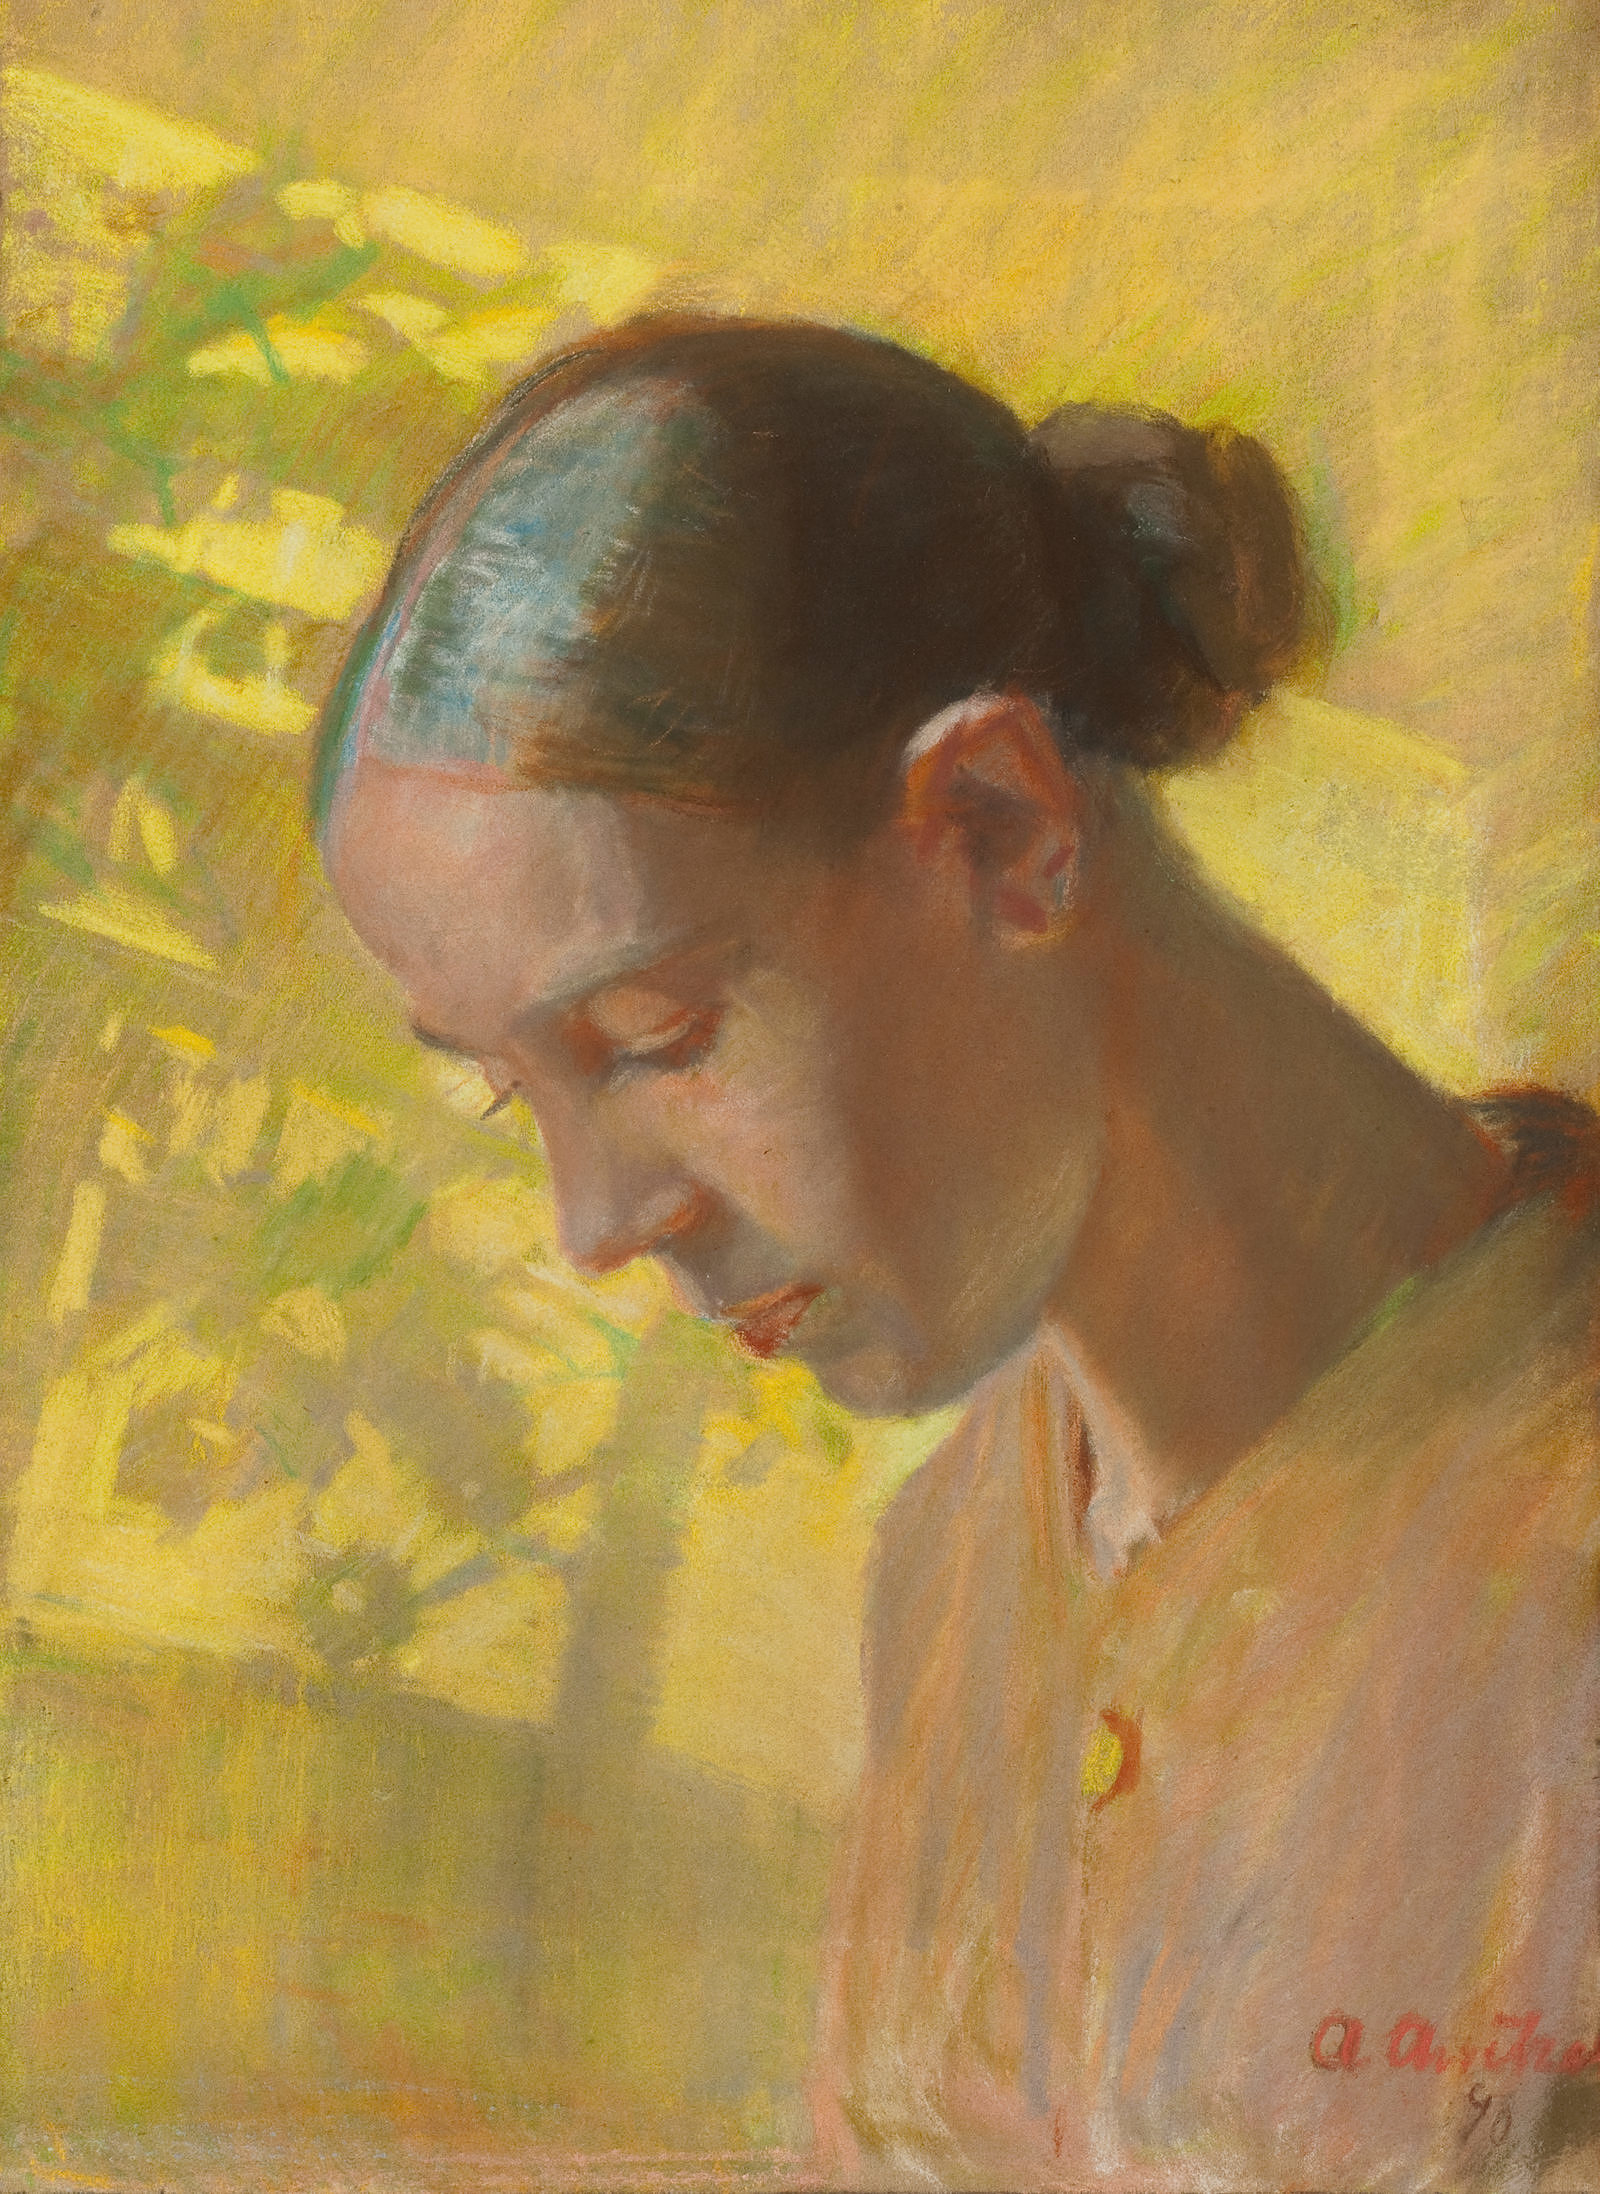 Study of the Seamstress’ Head, Ane by Anna Ancher - 1890 Statens Museum for Kunst